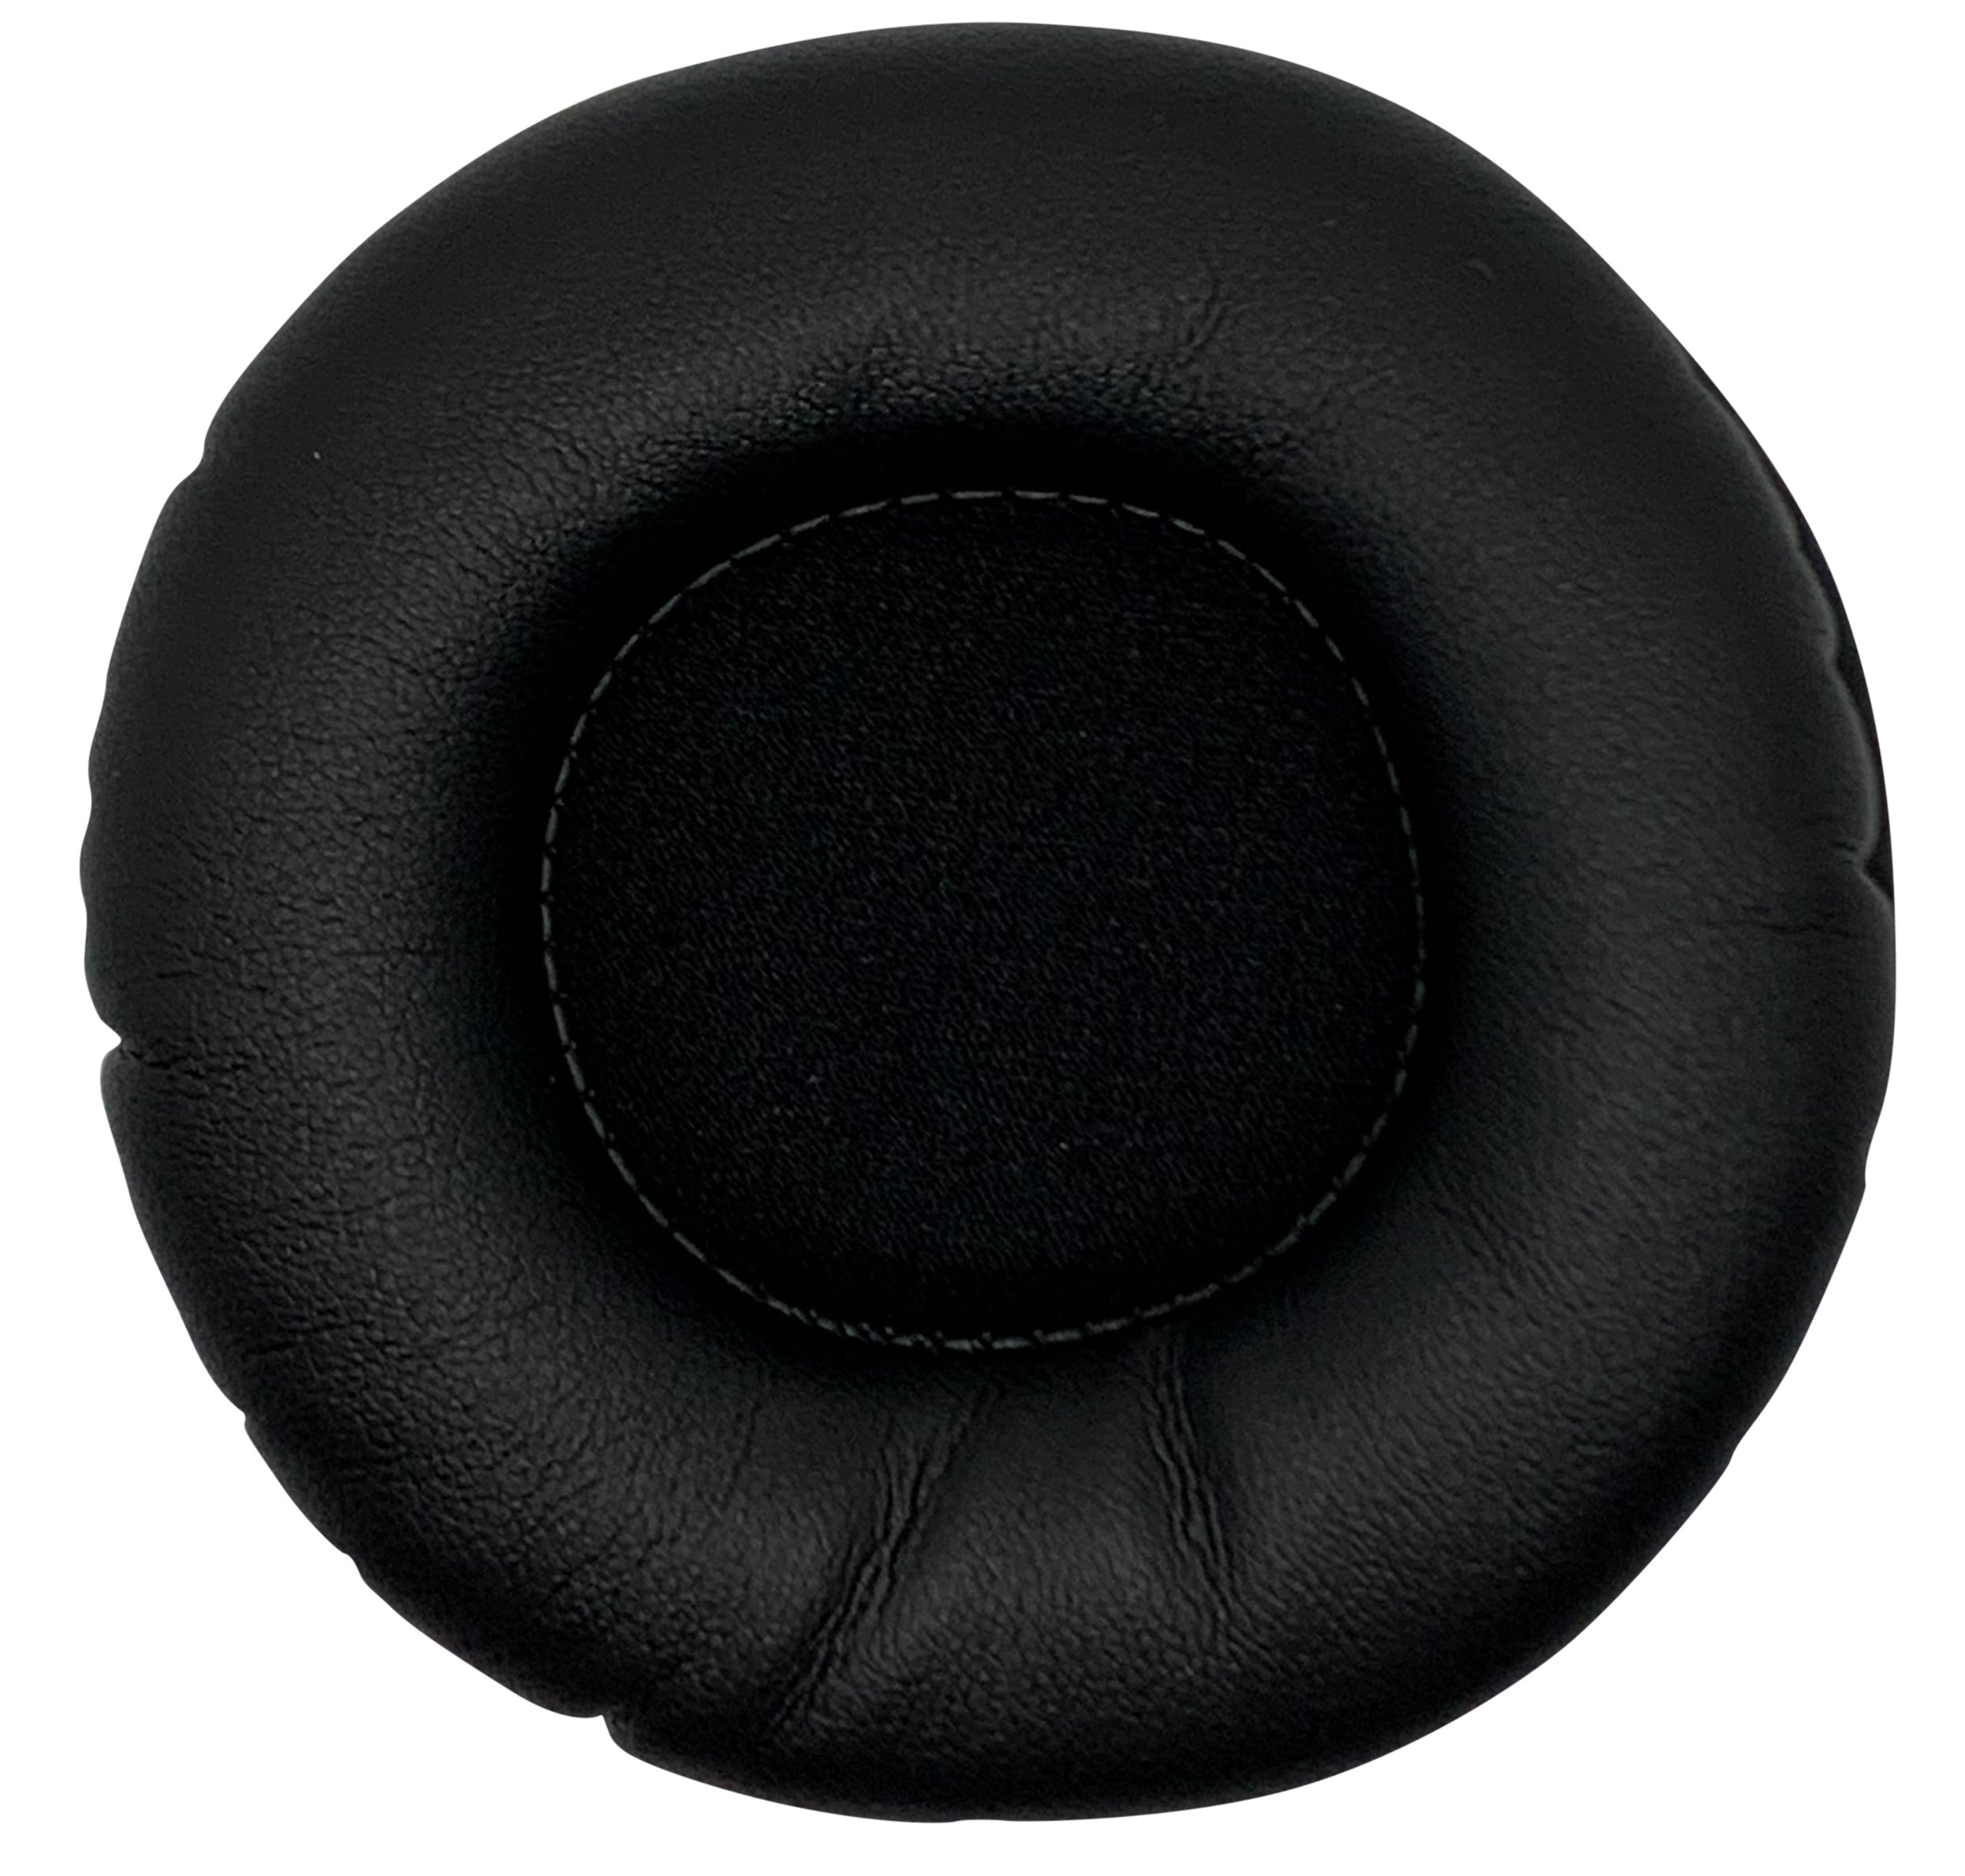 Premium CentralSound Replacement Ear Pad Cushions for Sony Headphones  MDR V55 MDR V500 MDR 7502 - CentralSound